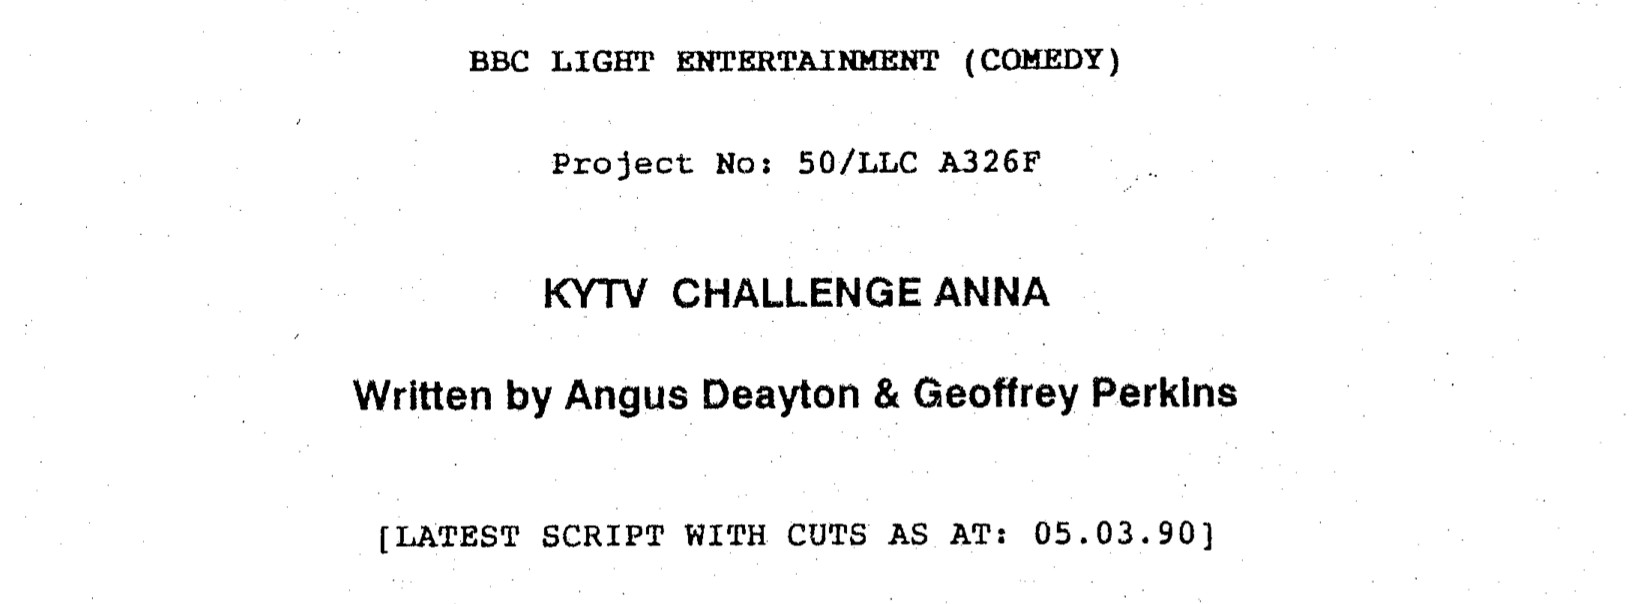 Front page of KYTV Challenge Anna script